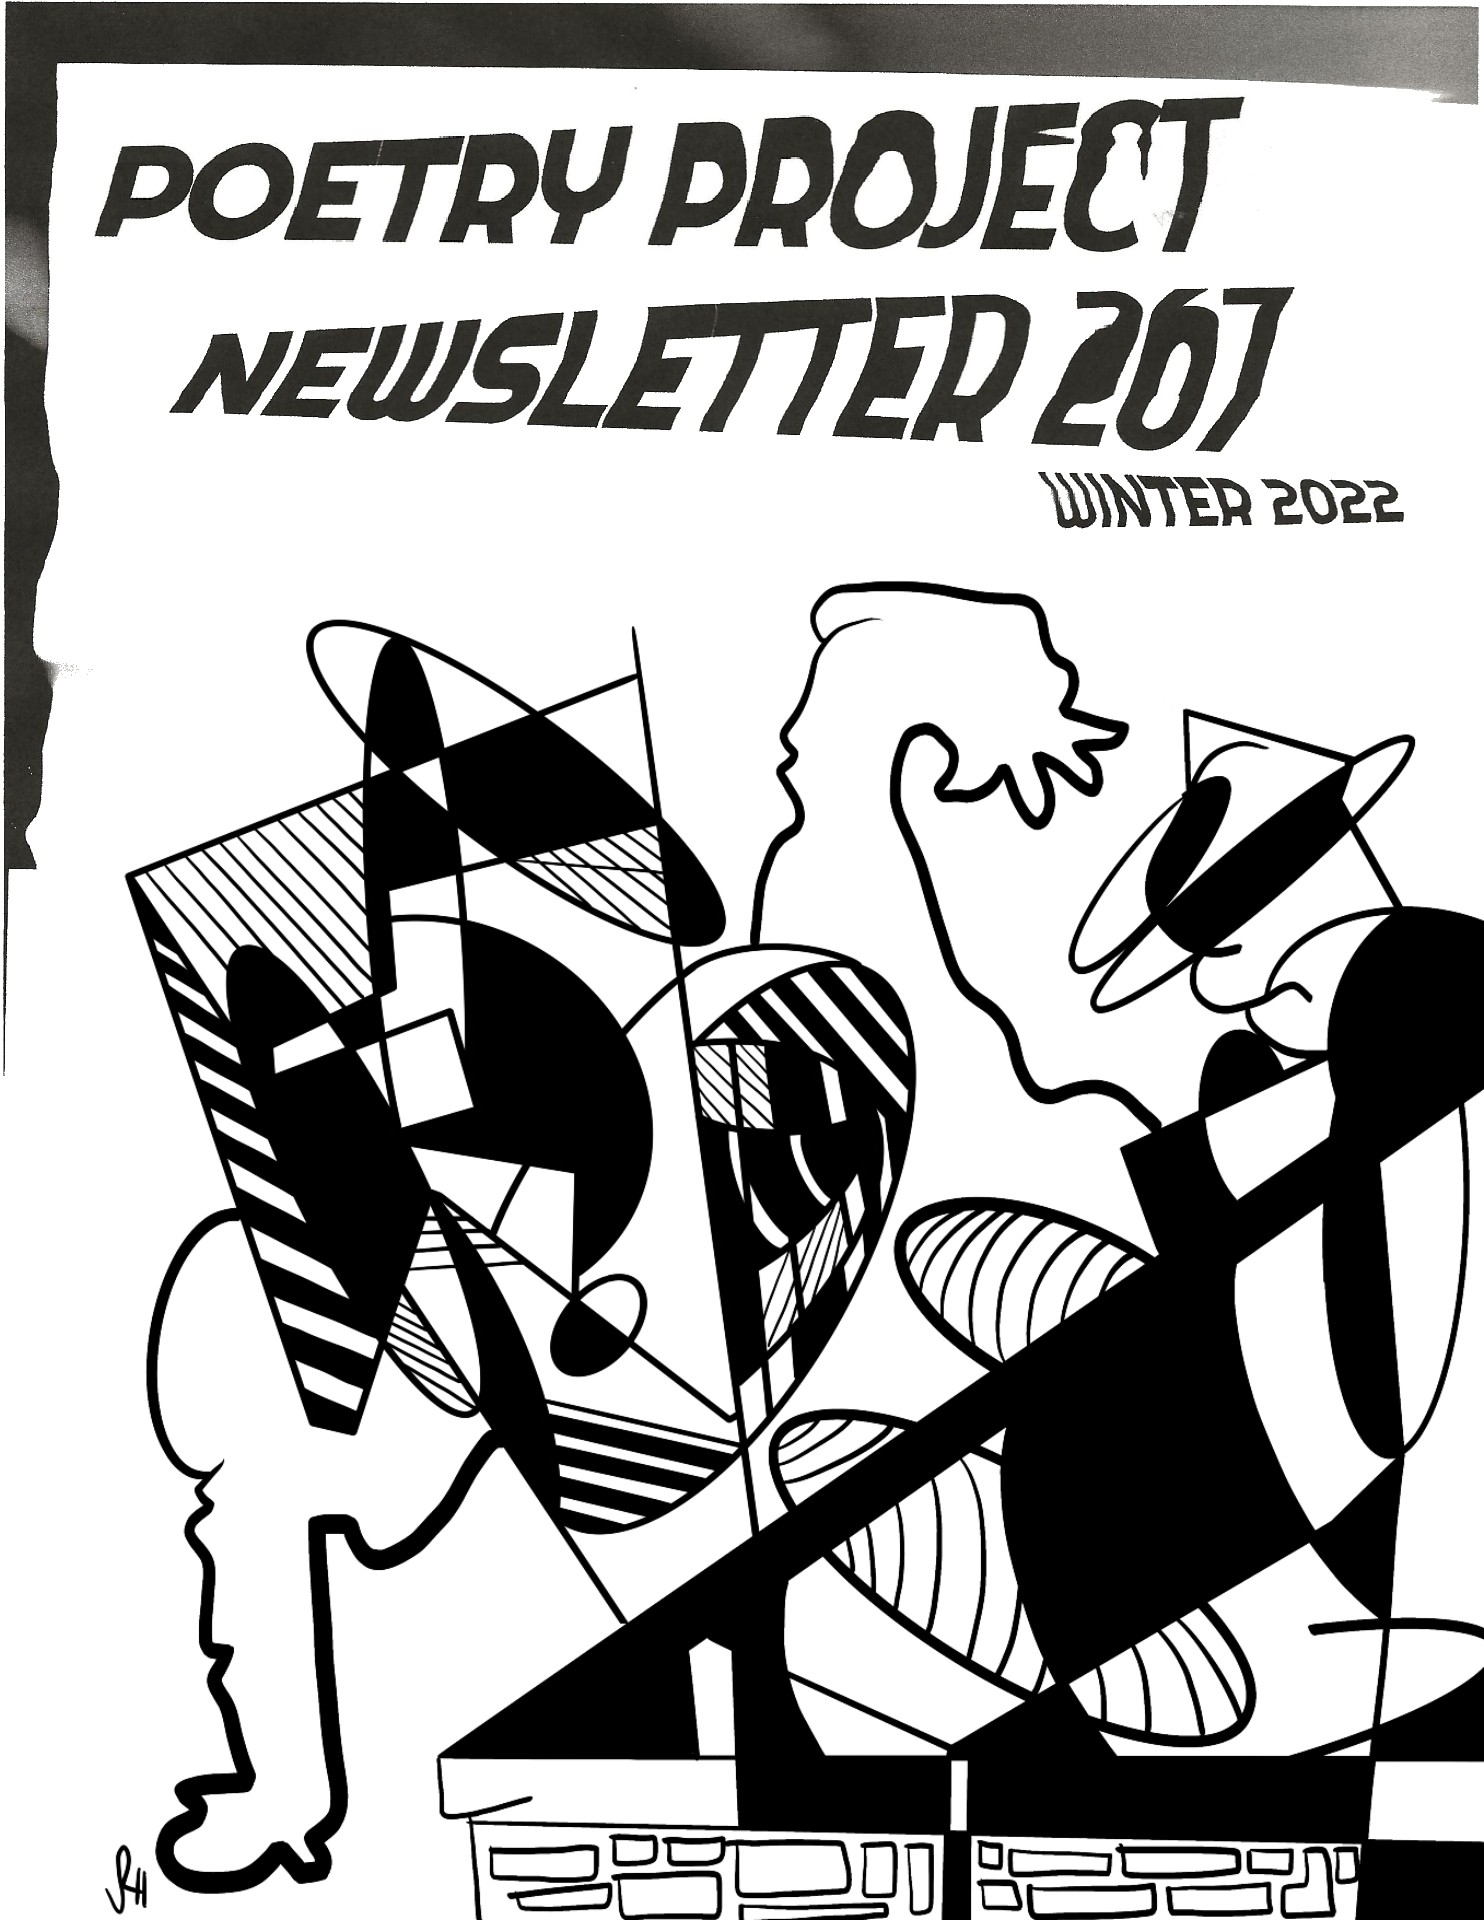 The cover of the issue is an abstract black and white line drawing by Joselia Rebekah Hughes, with many intersecting shapes